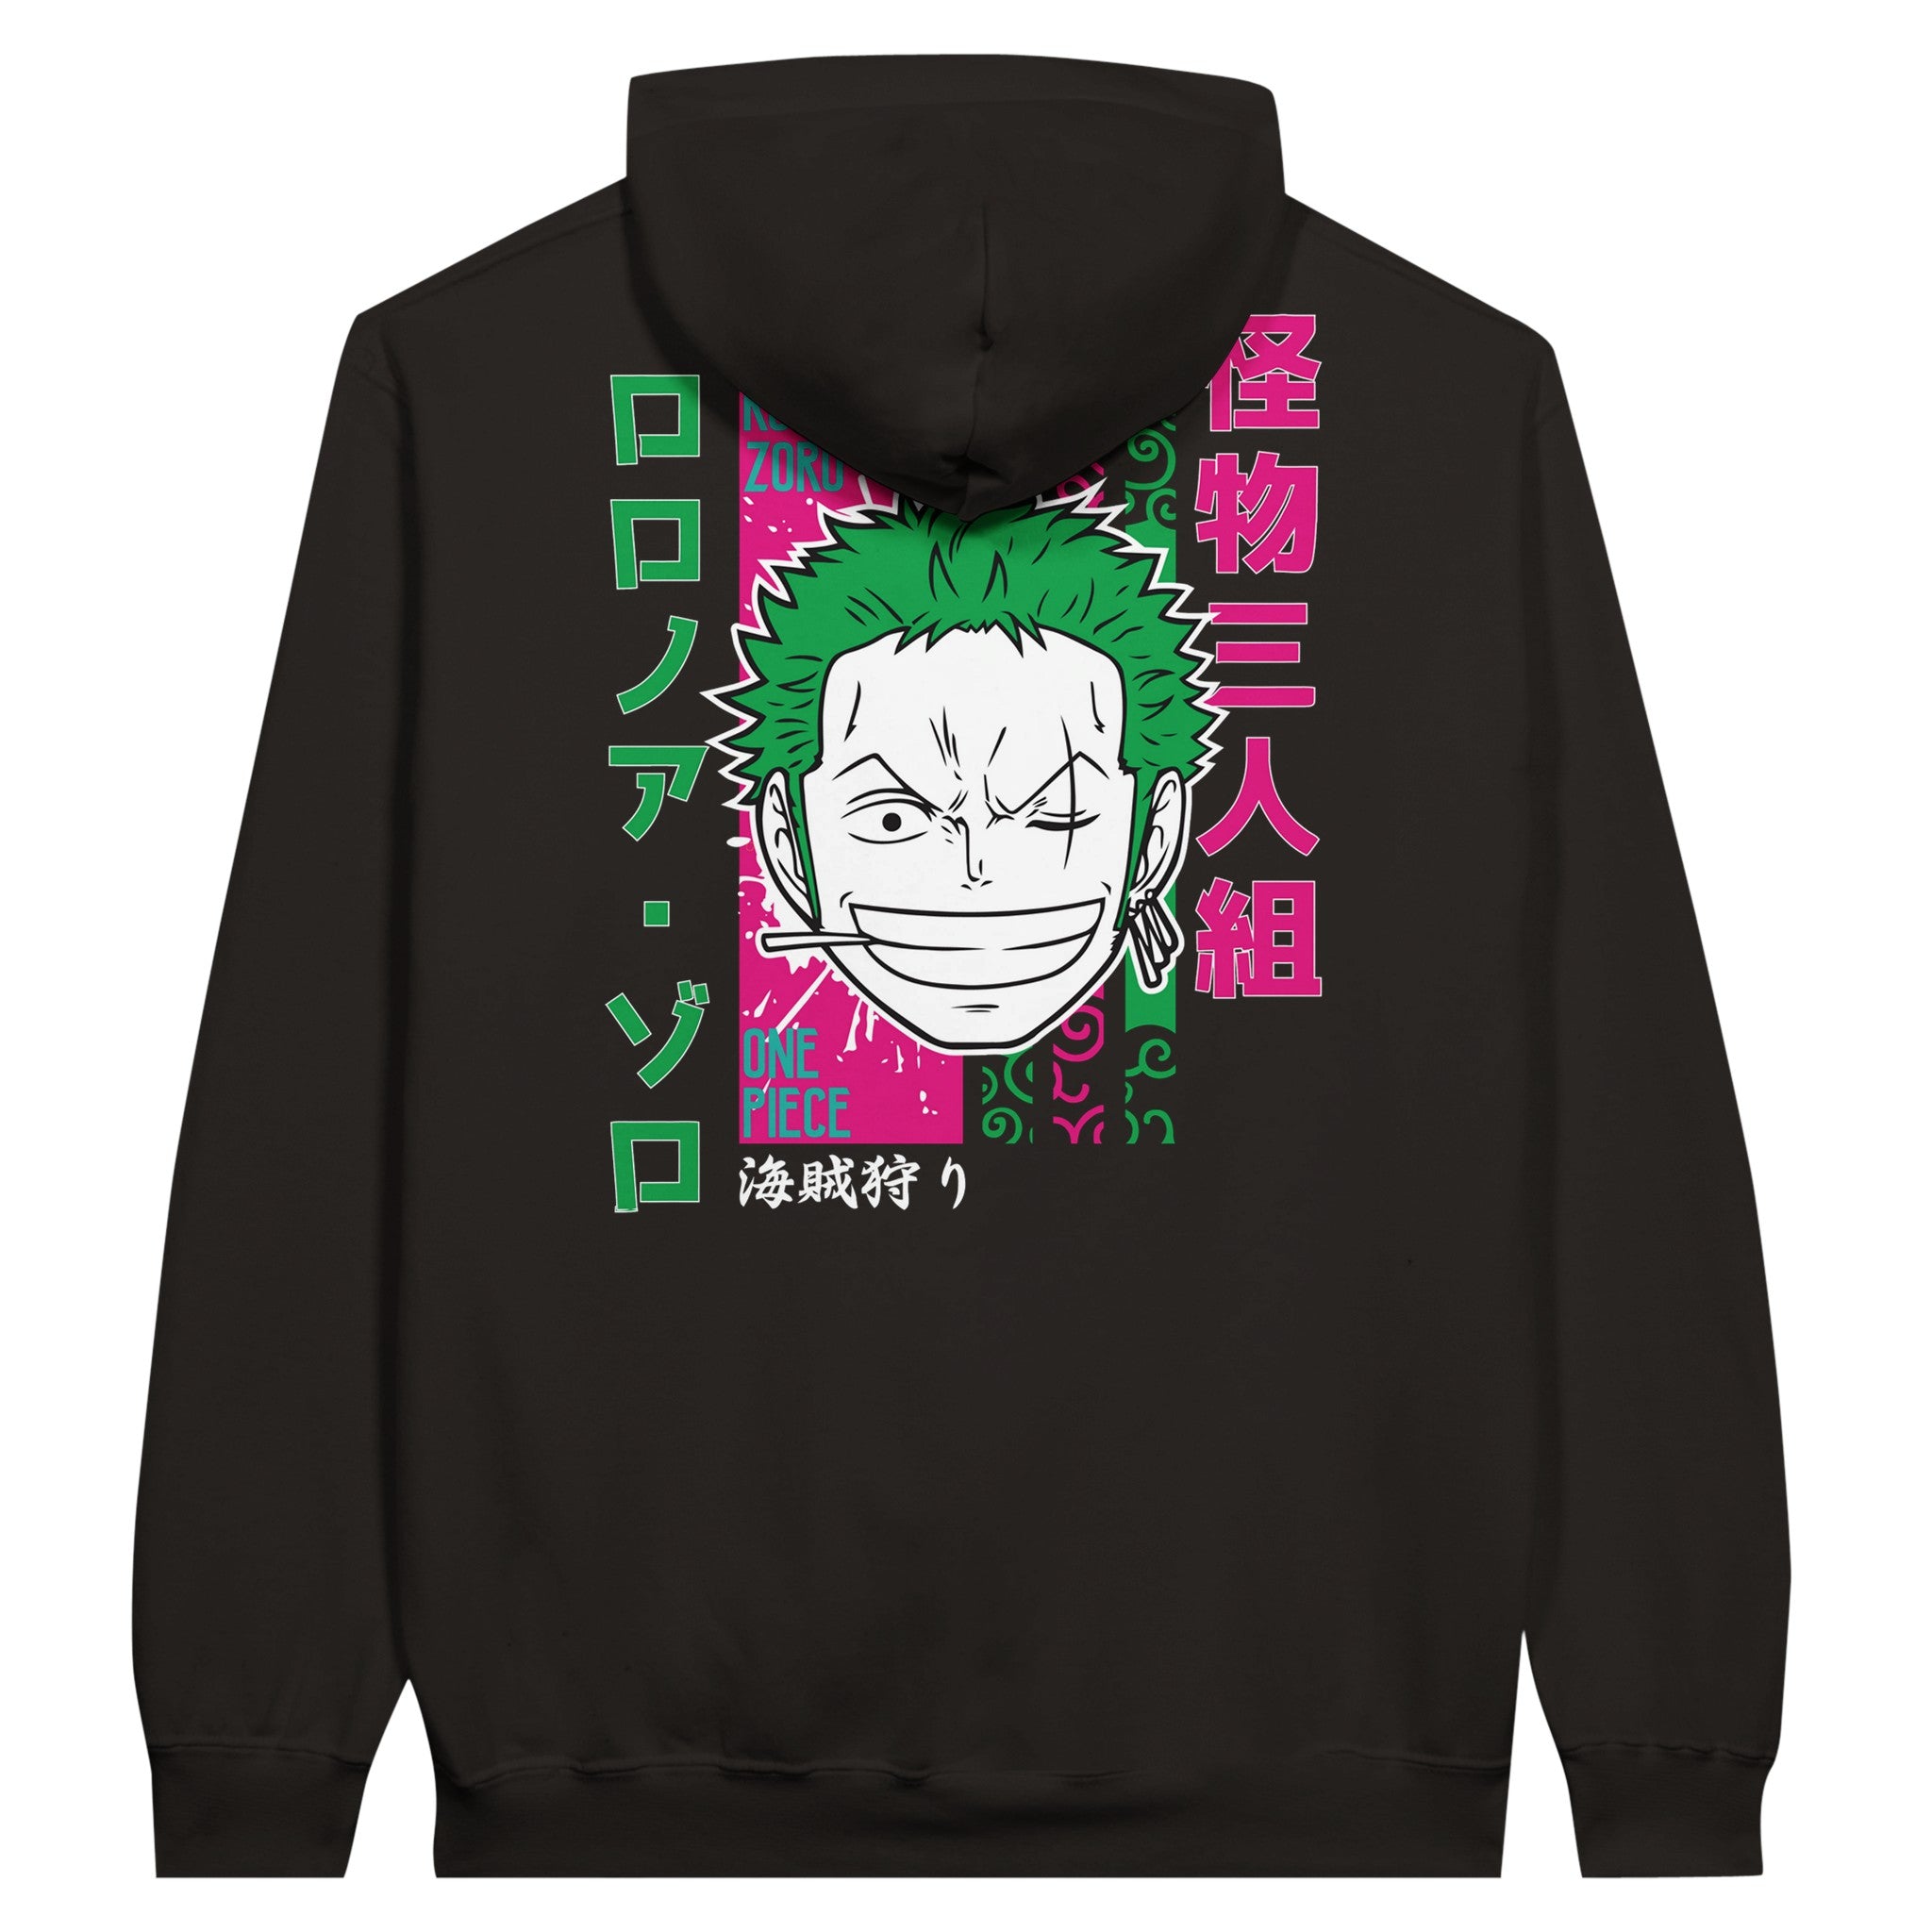 shop and buy one piece anime clothing zoro hoodie